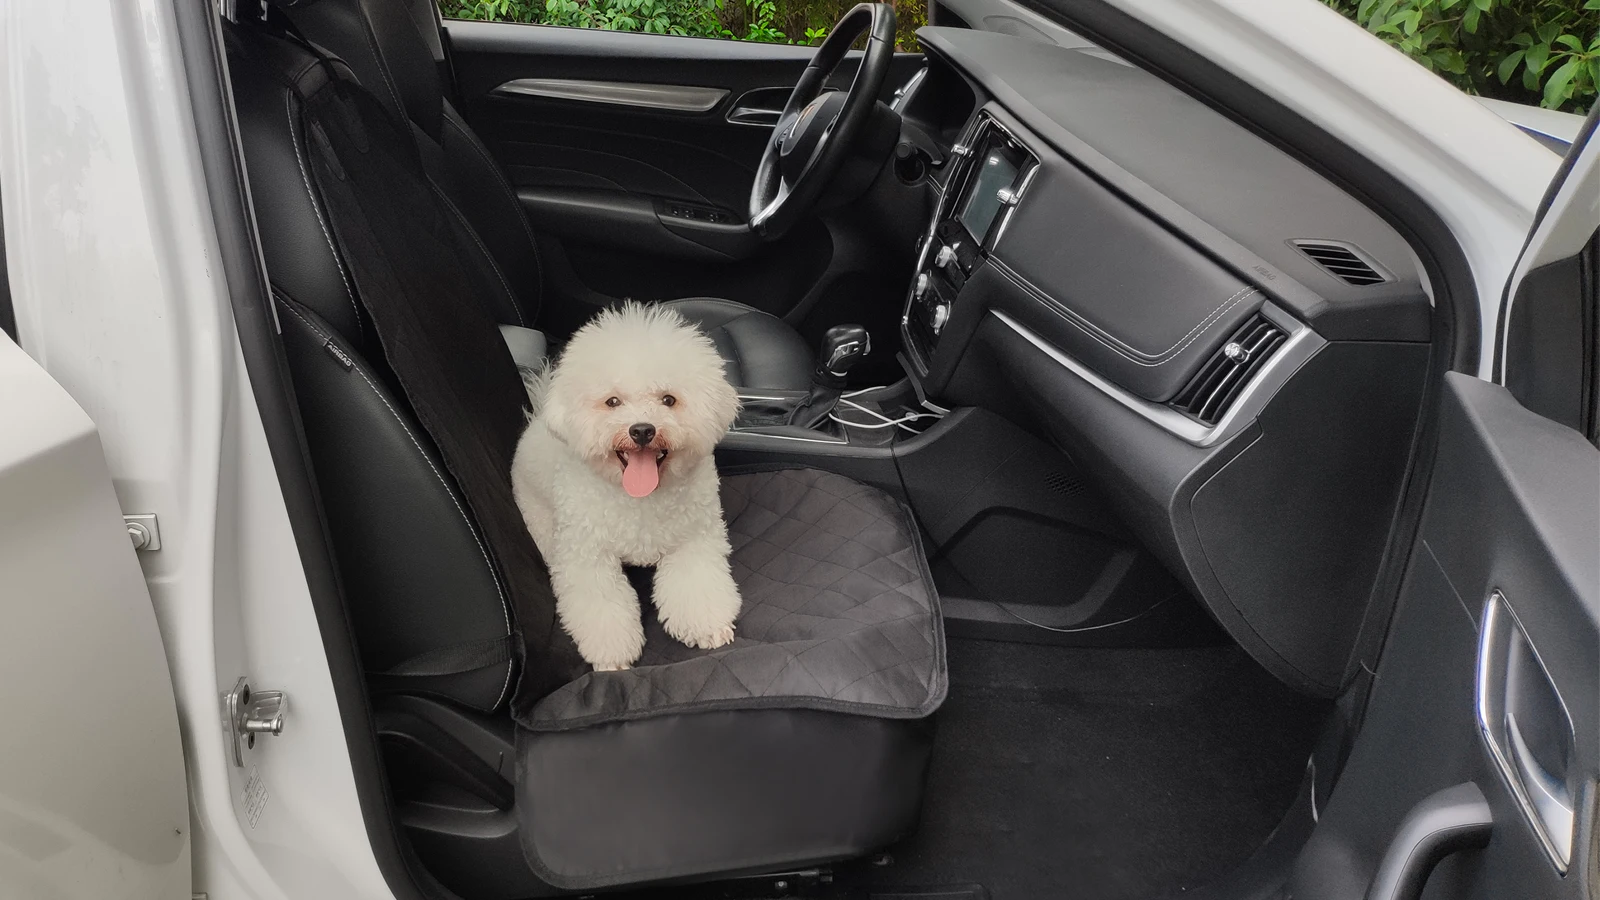 AUTOARK Pet Front Seat Cover,Dog Car Seat Cover WaterProof & Nonslip Rubber Backing with Anchors Universal Design for All Cars,Trucks & SUVs,Black,AAMU-027 